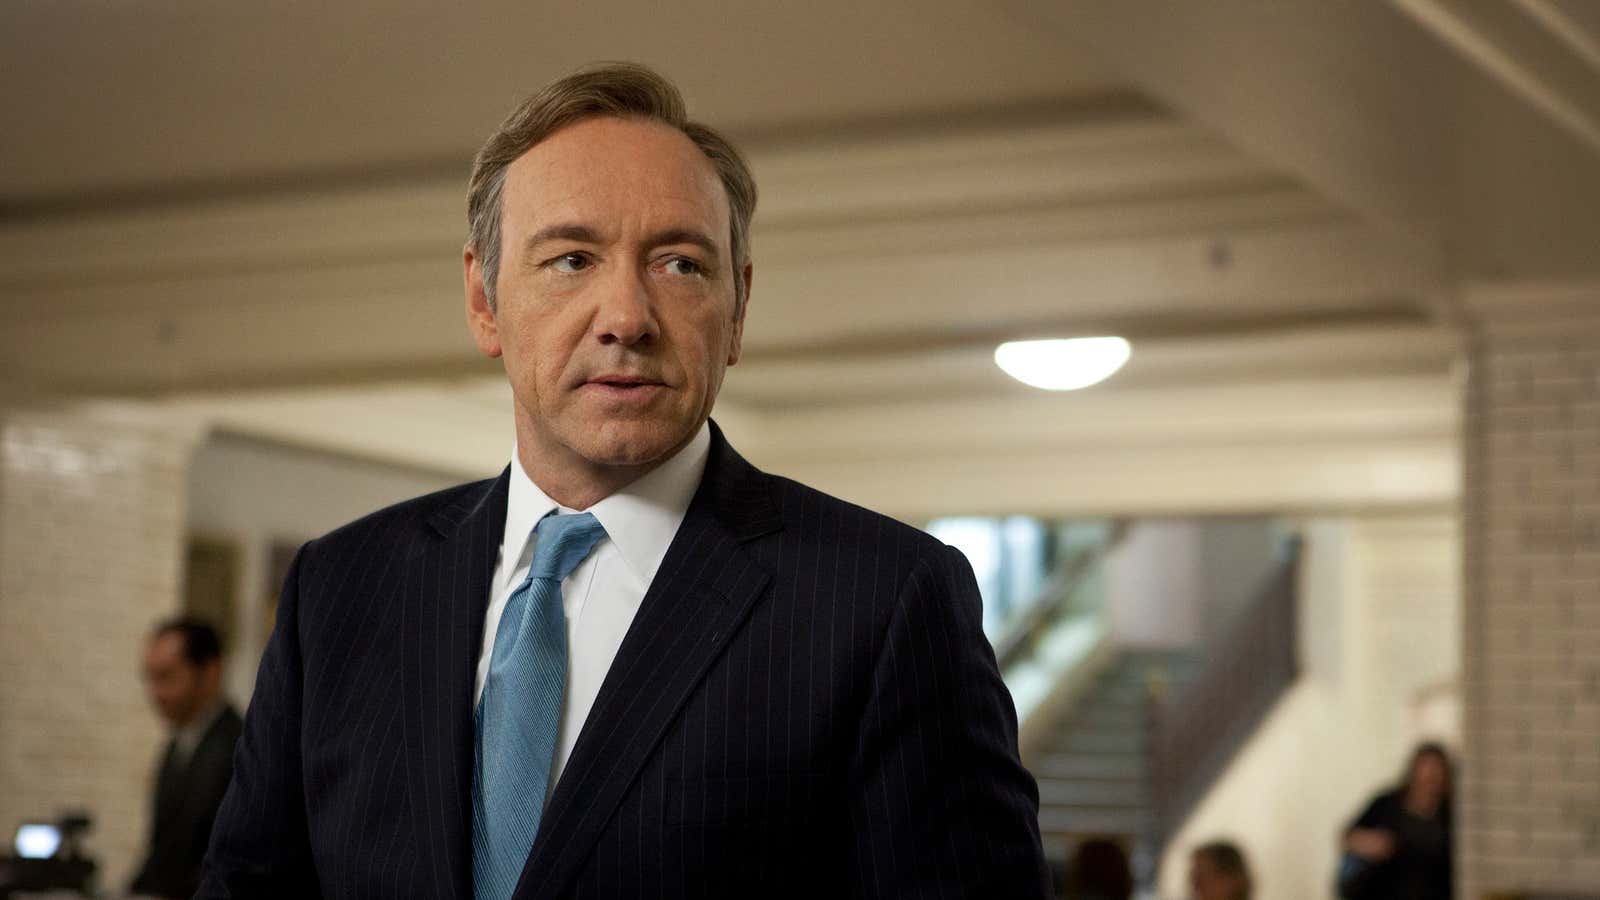 As Frank Underwood will tell you, to get people’s attention you need to make them hungry.